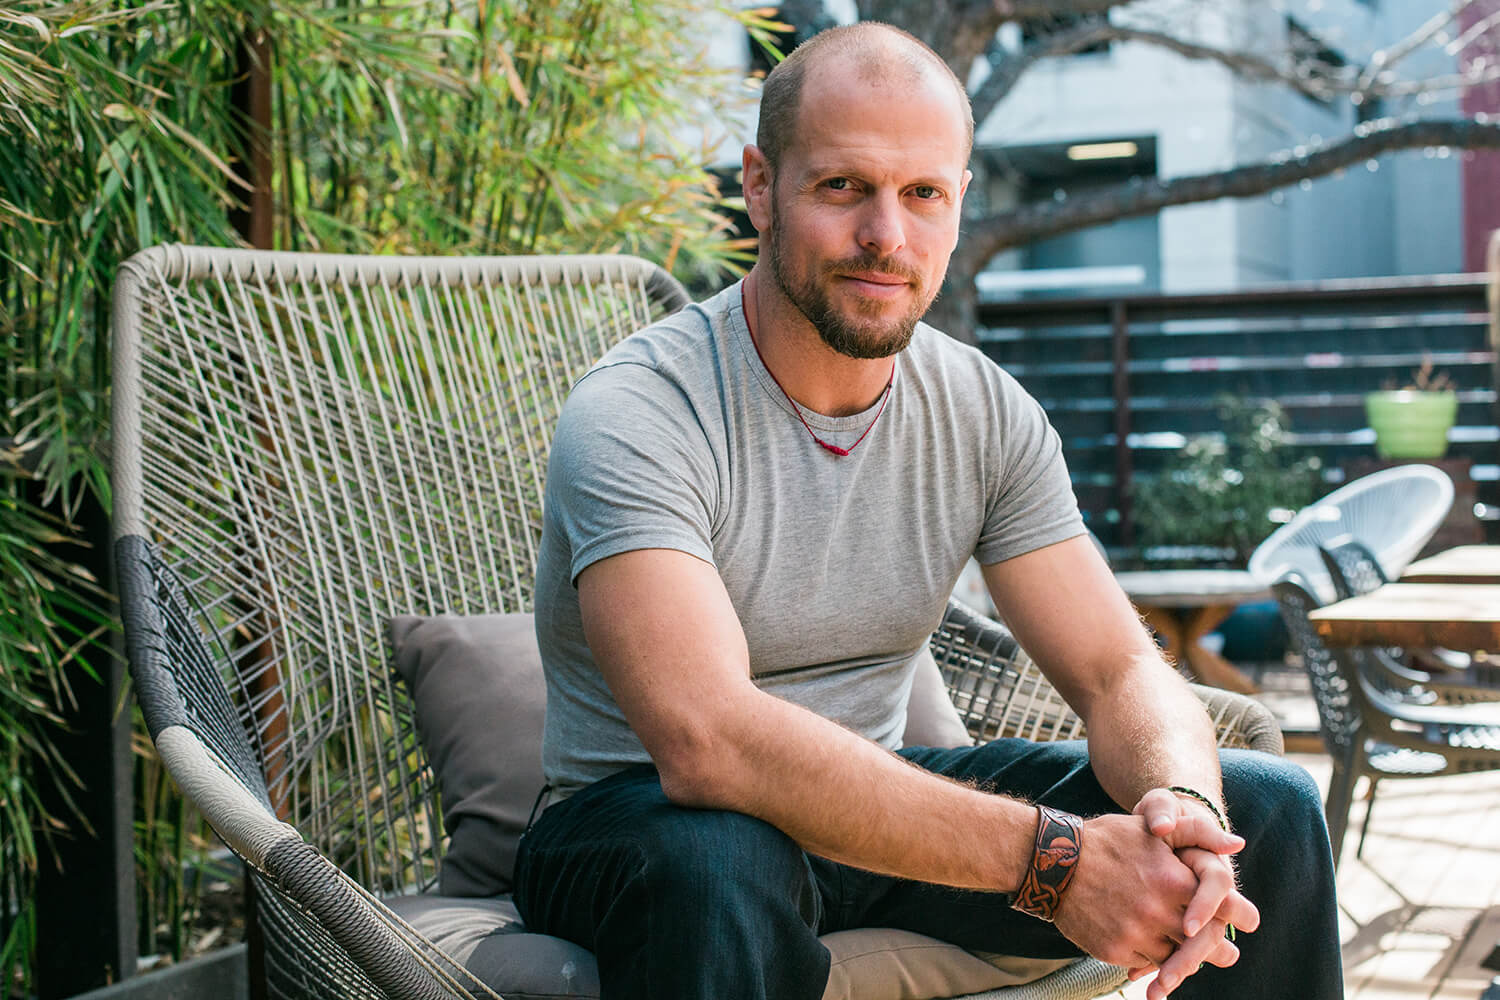 Tim Ferriss in jeans and a t-shirt sitting forward on a patio chair.